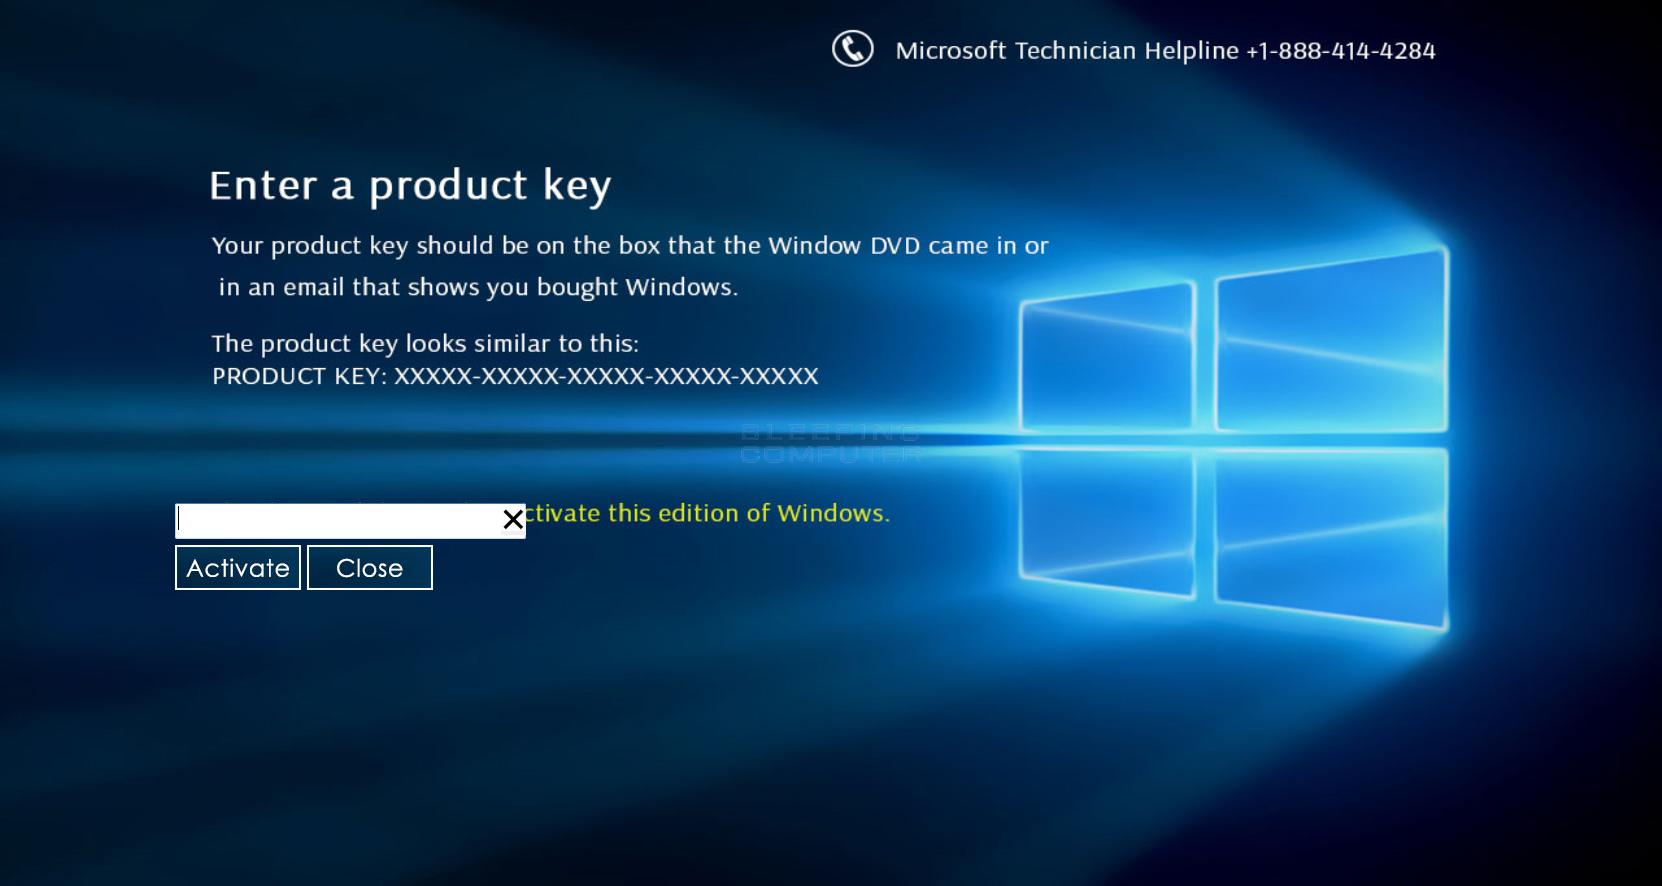 Enter a valid product key and click Next.
Follow the on-screen instructions to complete the activation process.